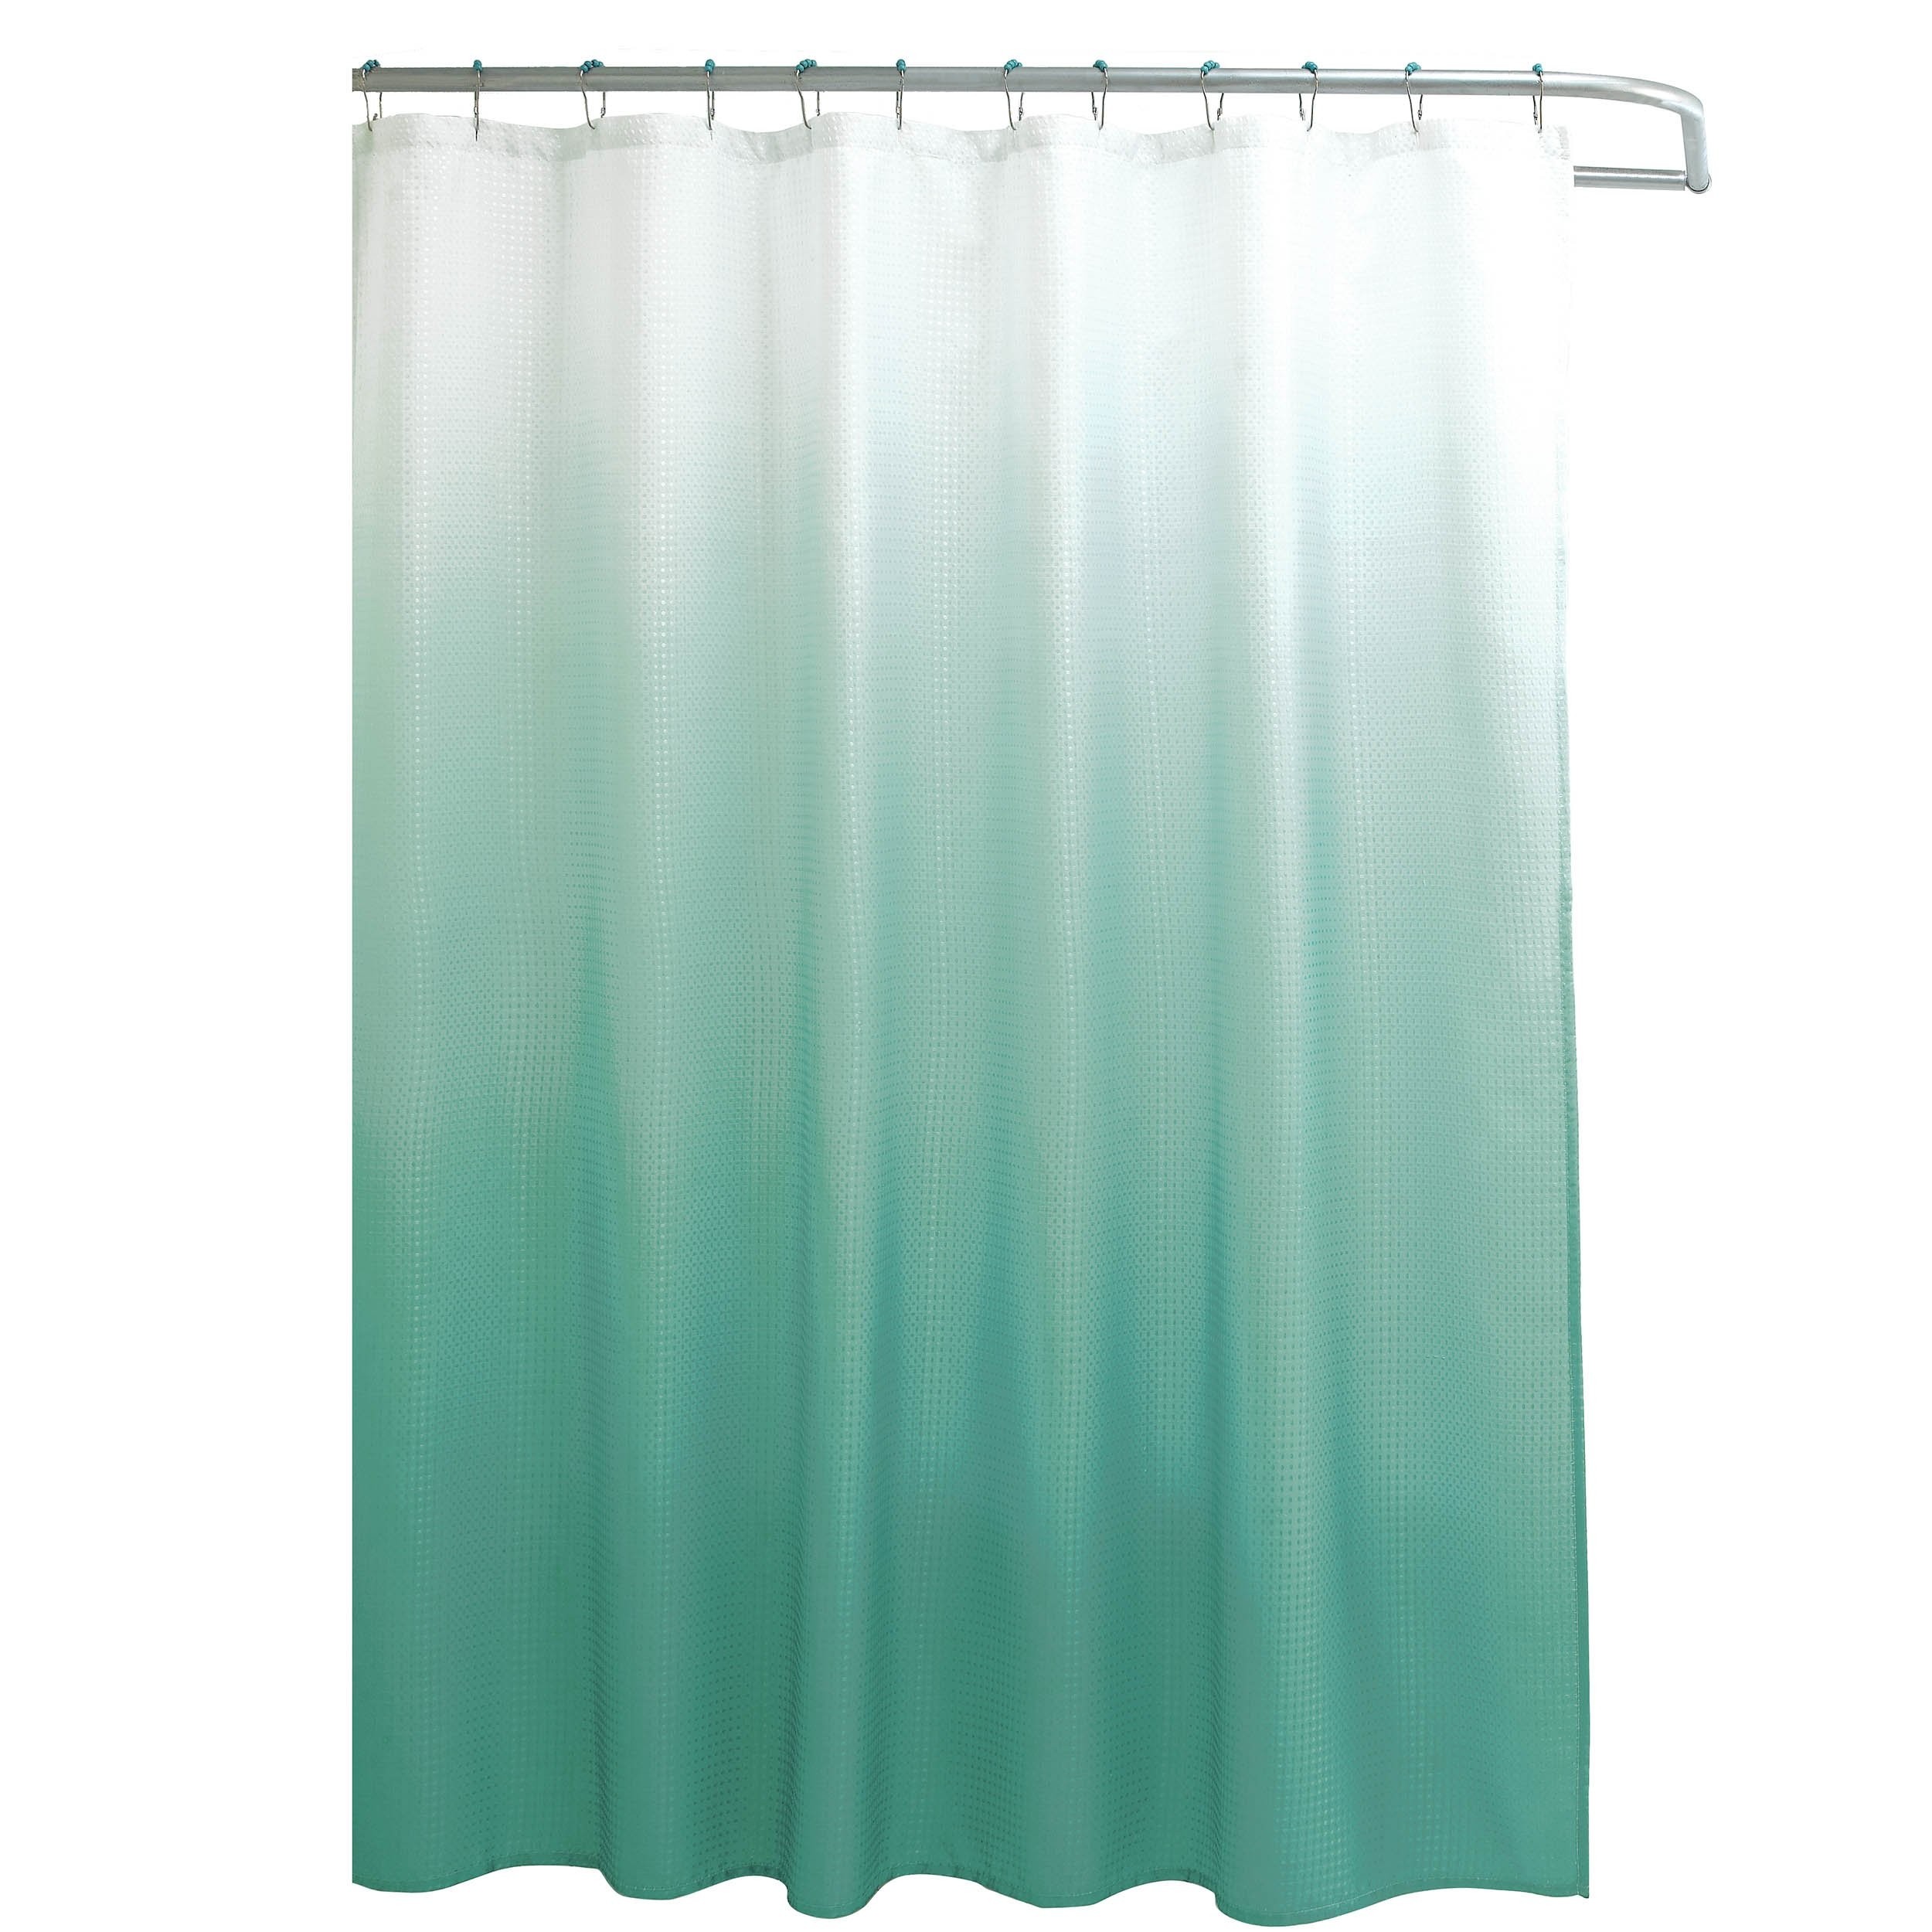 Creative home ideas ombre textured shower curtain with 1